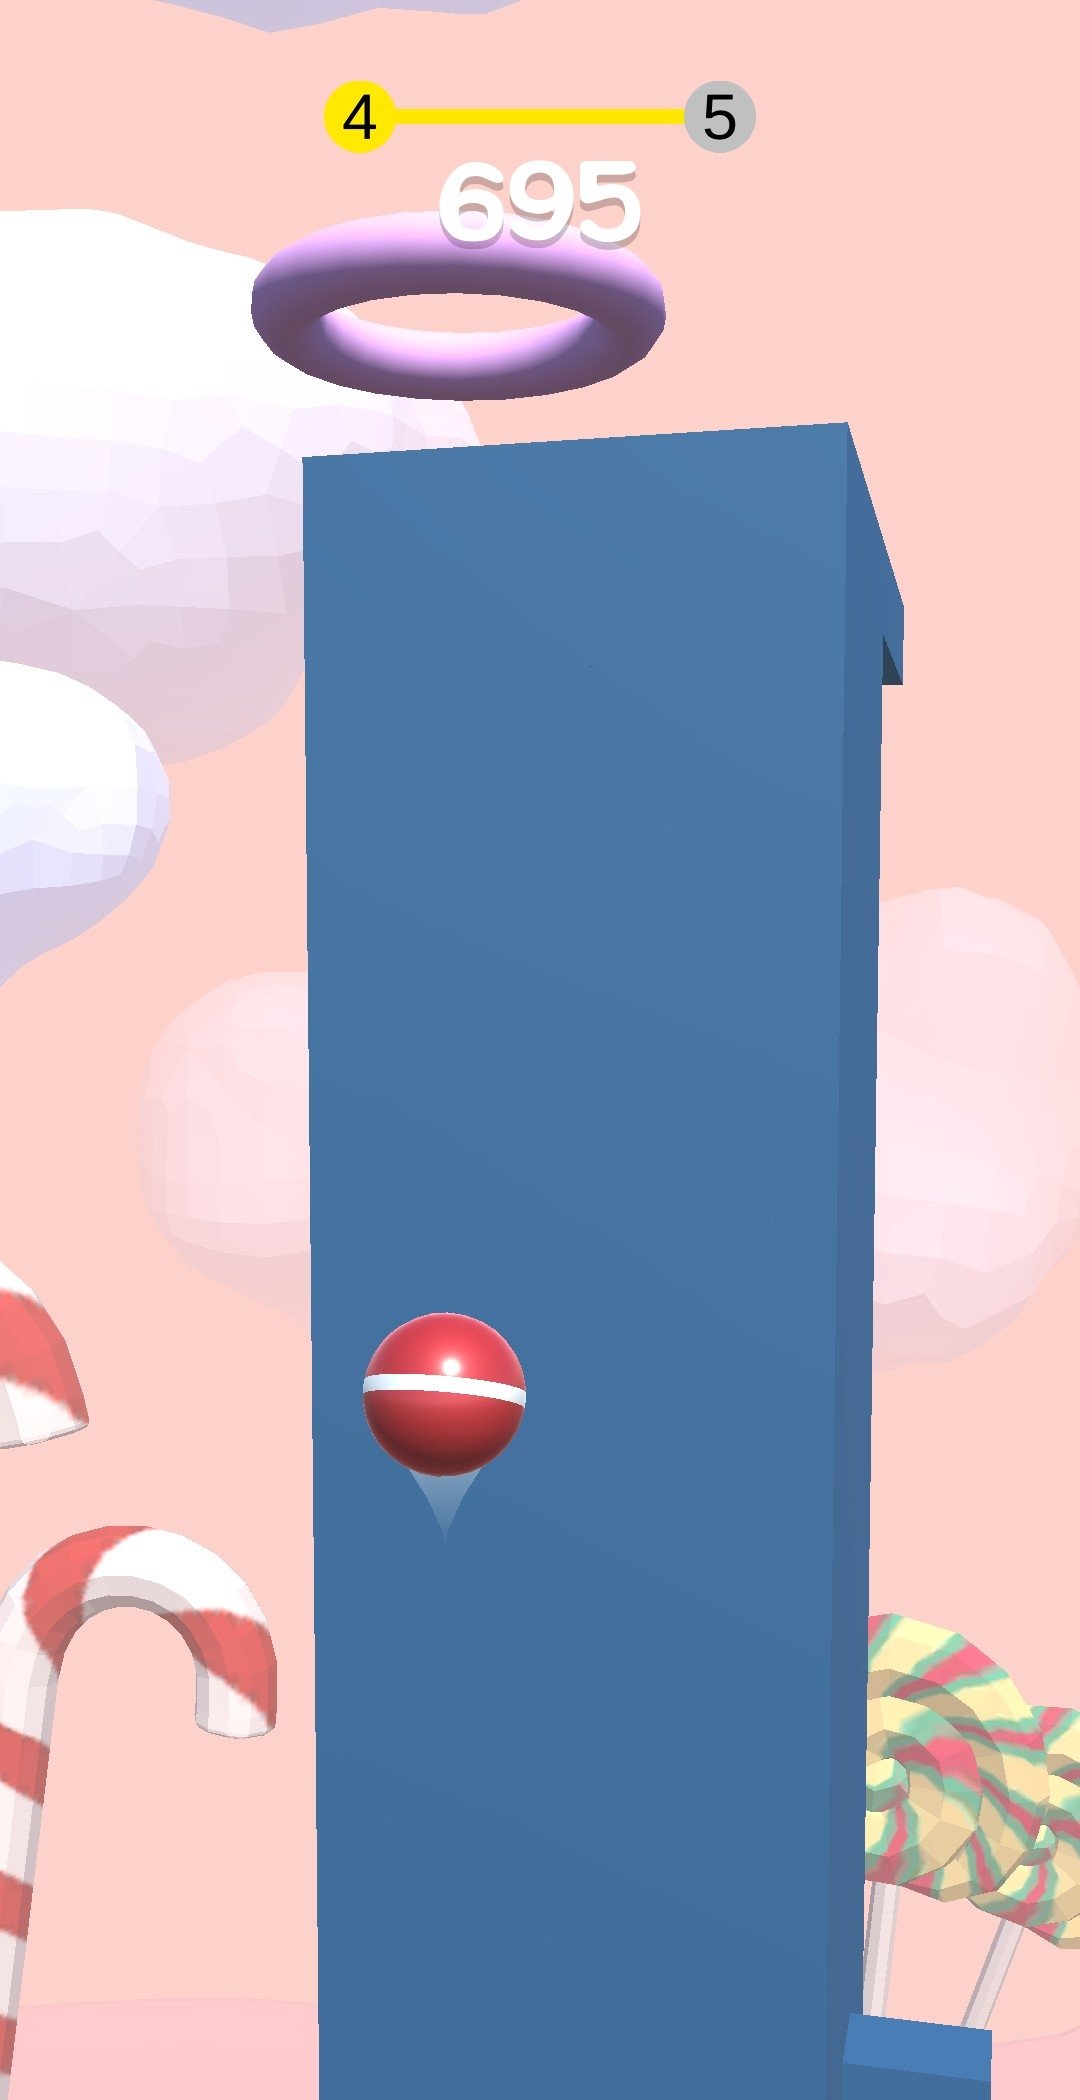 Pokey Ball - All Levels (iOS, Android) 